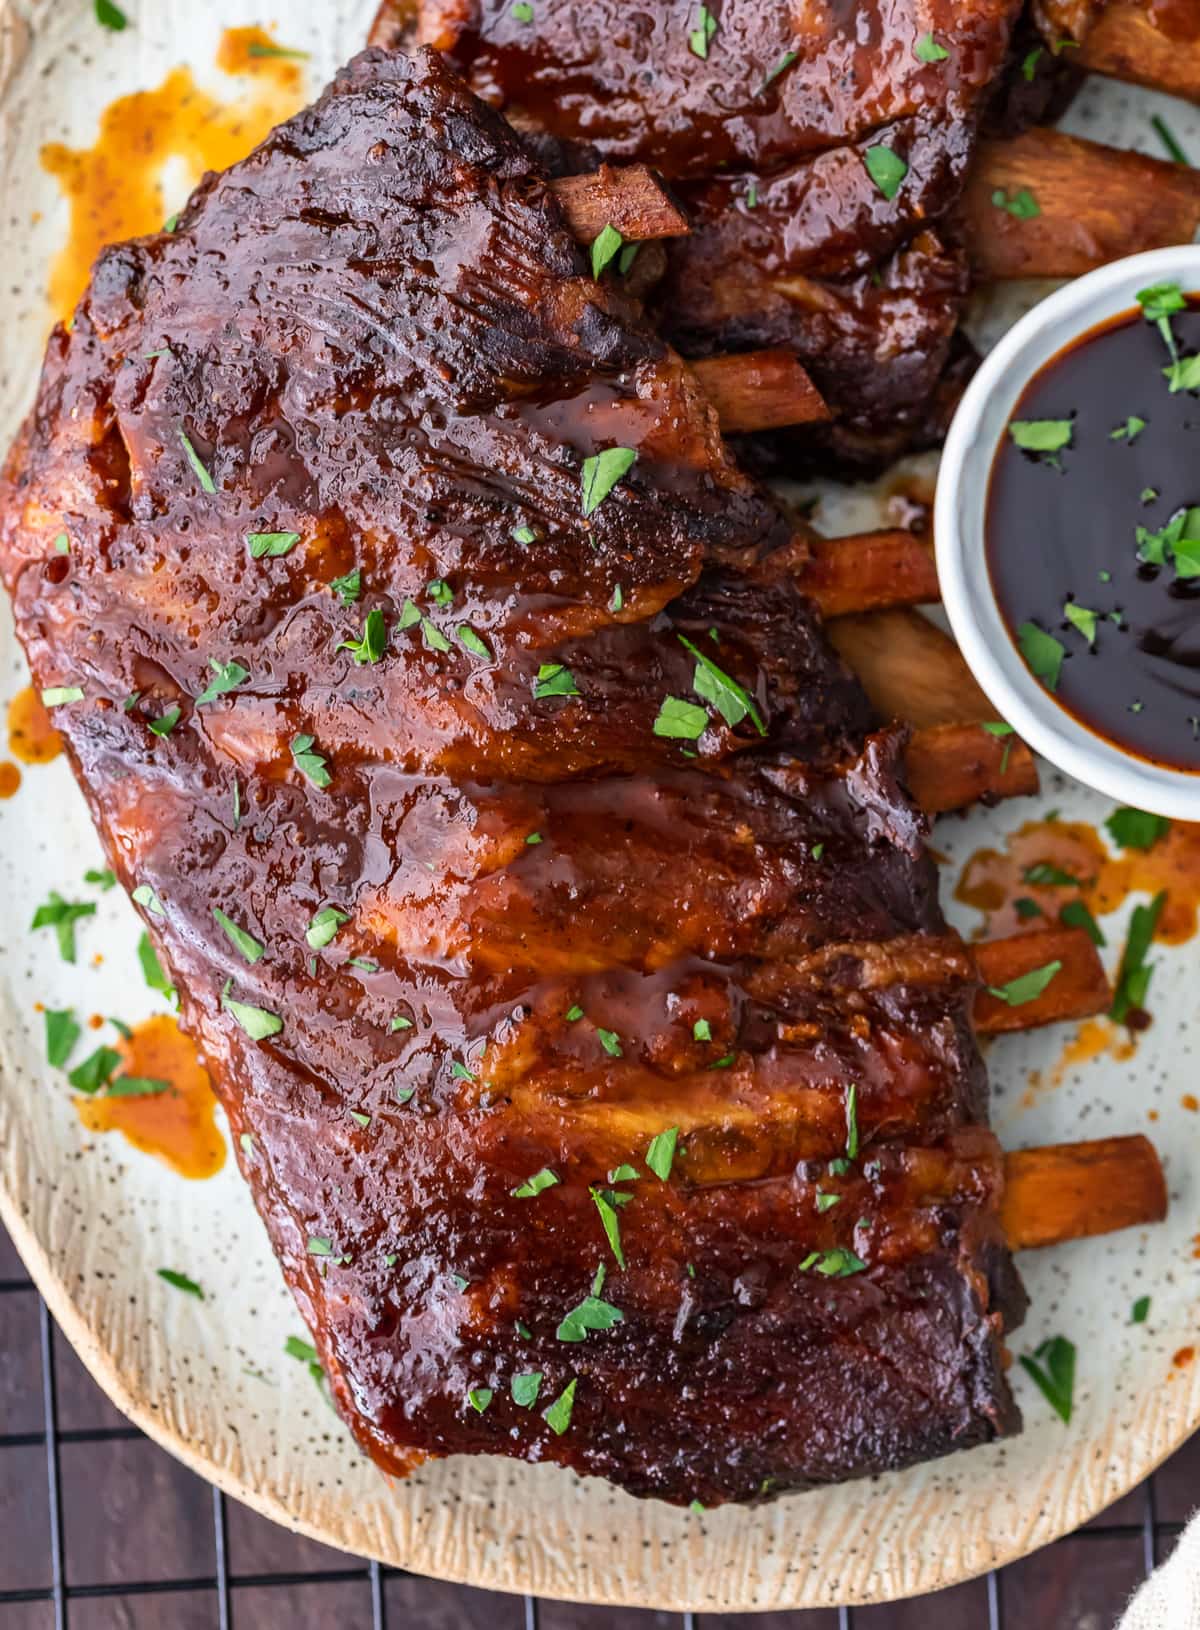 Crock Pot Ribs Slow Cooker Bbq Ribs Recipe How To Video,How Long To Cook Meatloaf At 325